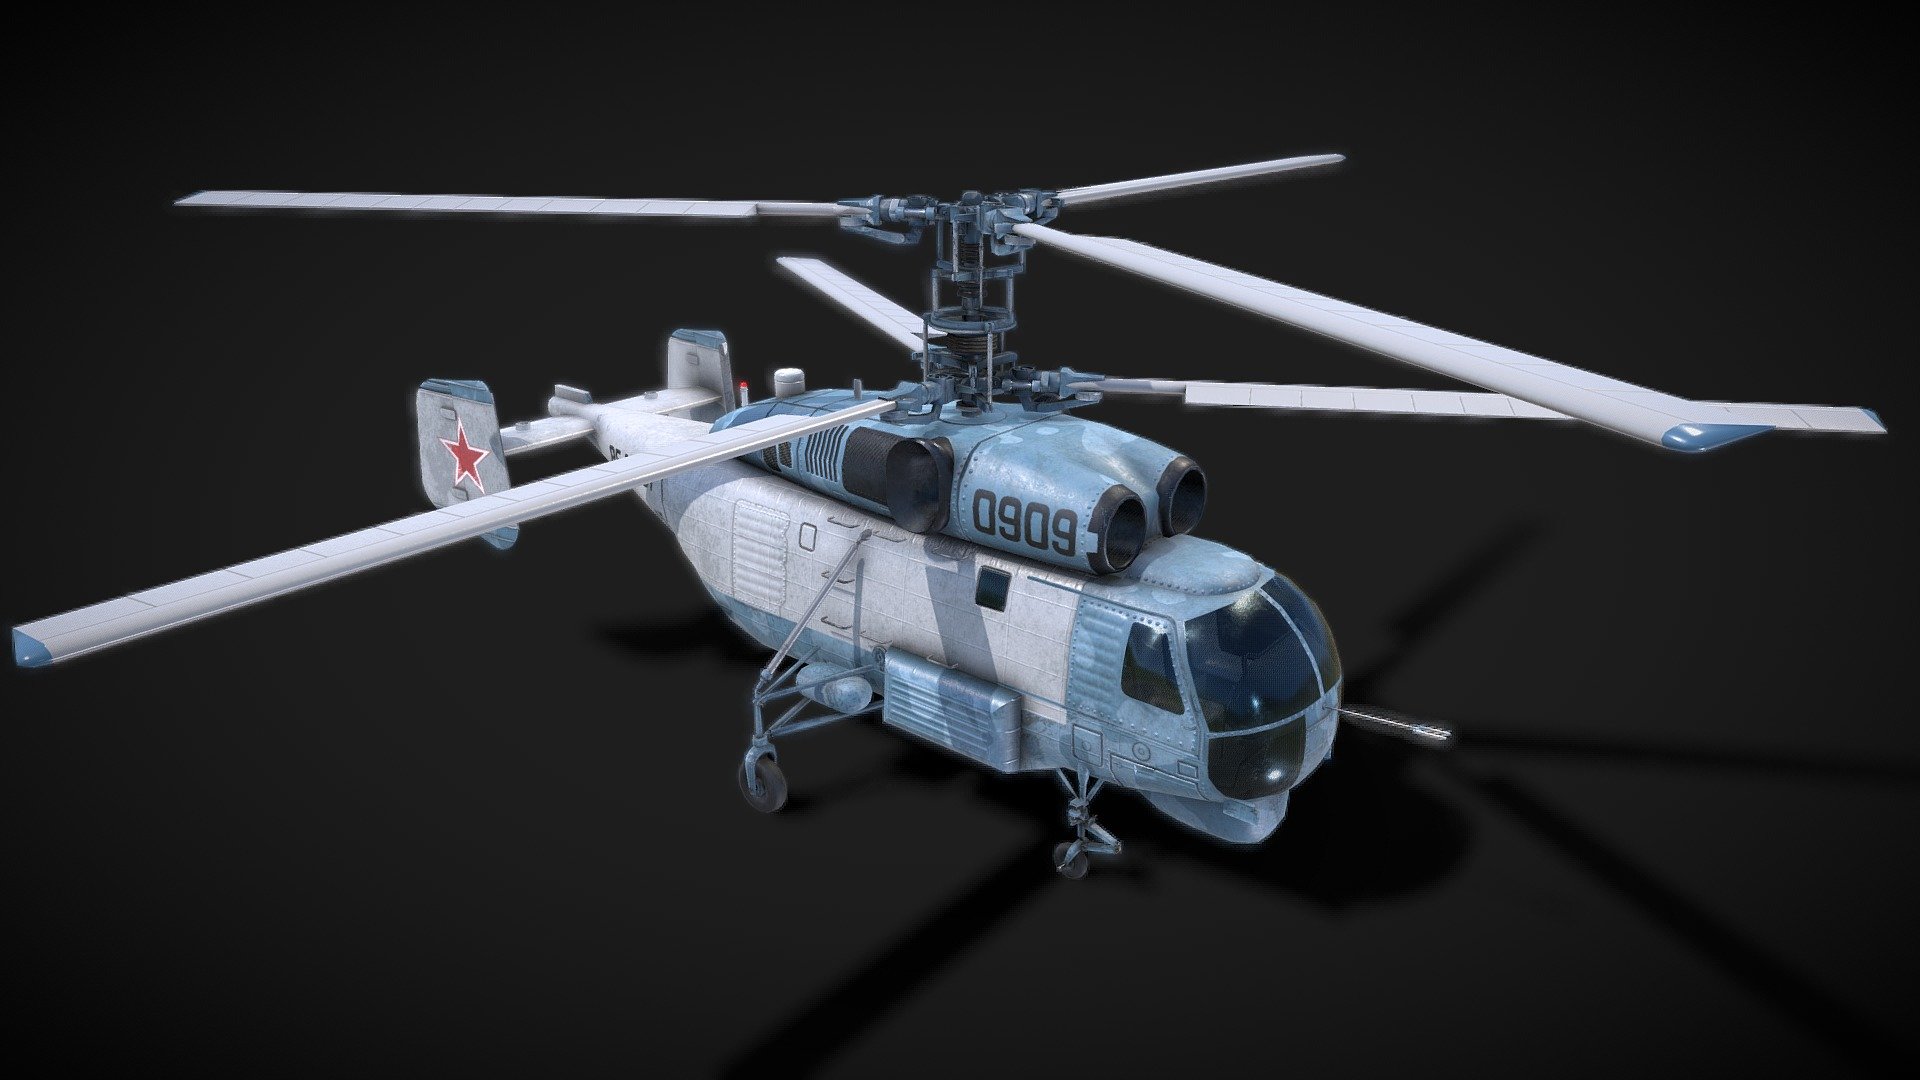 K27 Helicopter low poly 3D model

The Kamov Ka-27 (NATO reporting name &lsquo;Helix') is a military helicopter developed for the Soviet Navy, and currently in service in various countries including Russia, Ukraine, Vietnam, China, South Korea, and India. Variants include the Ka-29 assault transport, the Ka-28 downgraded export version, and the Ka-32 for civilian use 3d model